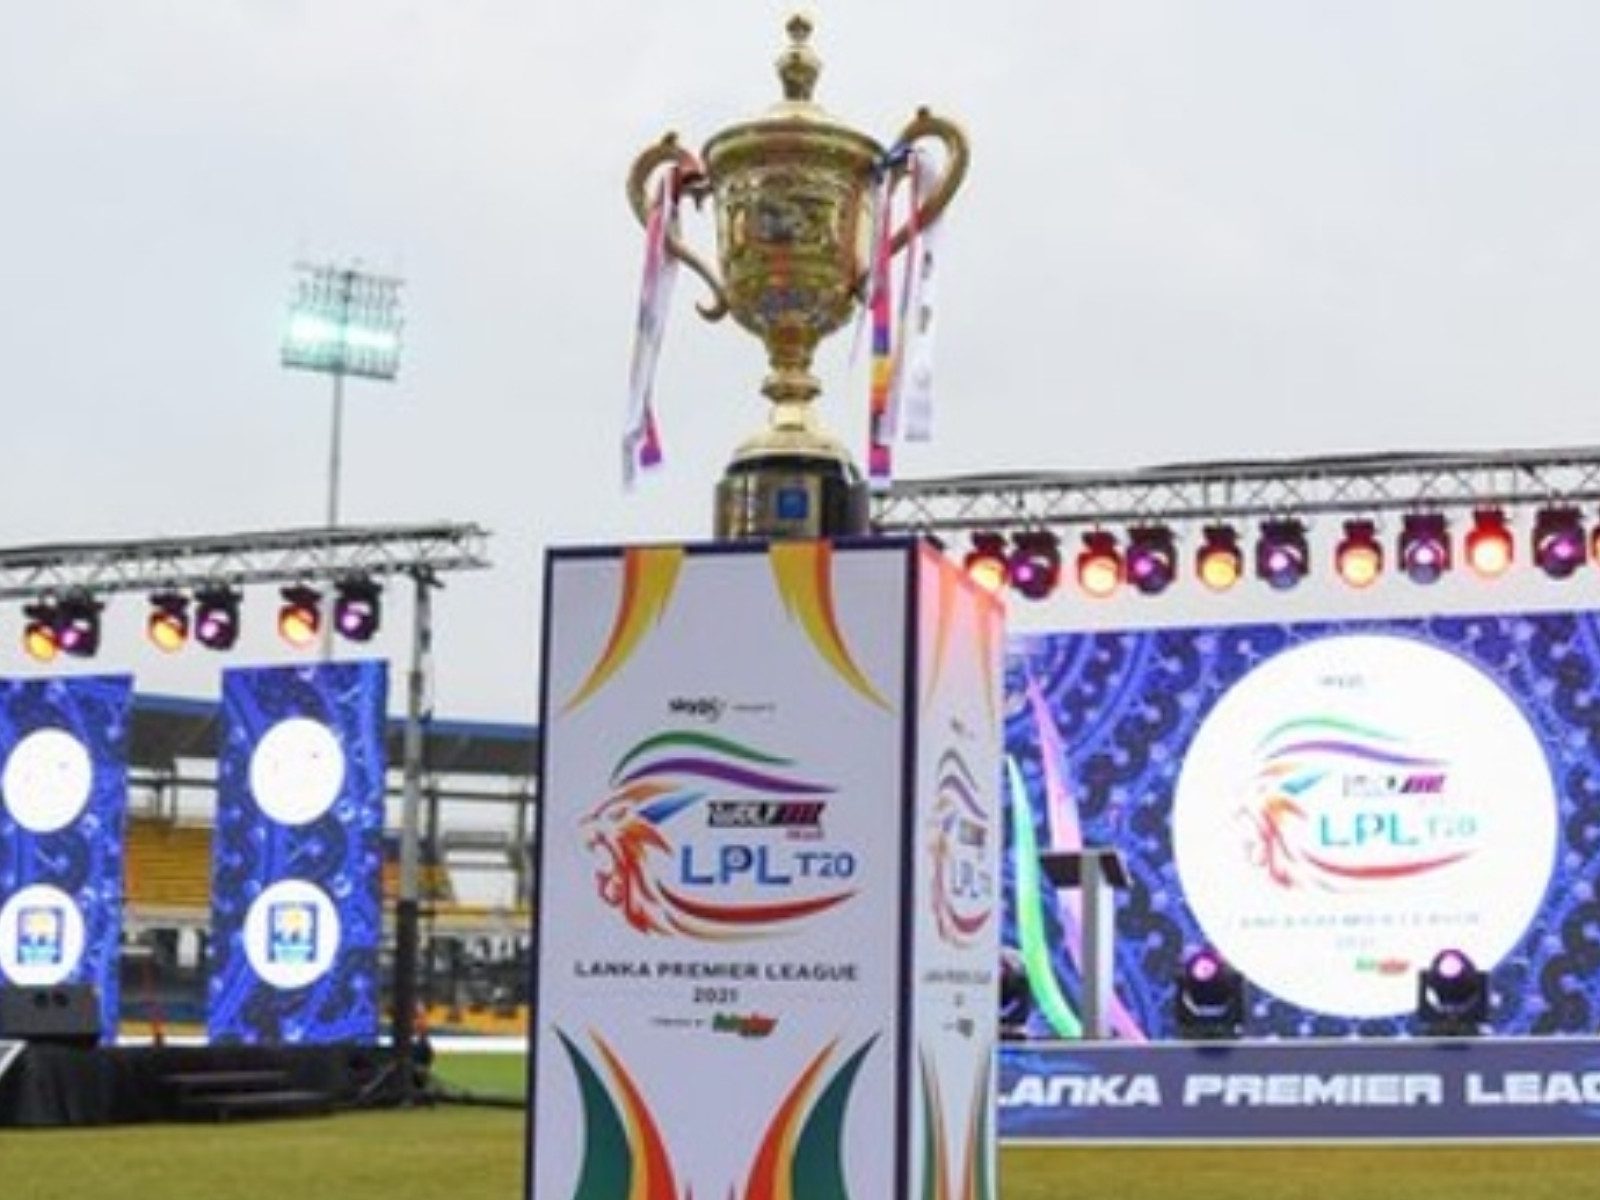 Lanka Premier League 2022 All you need to know